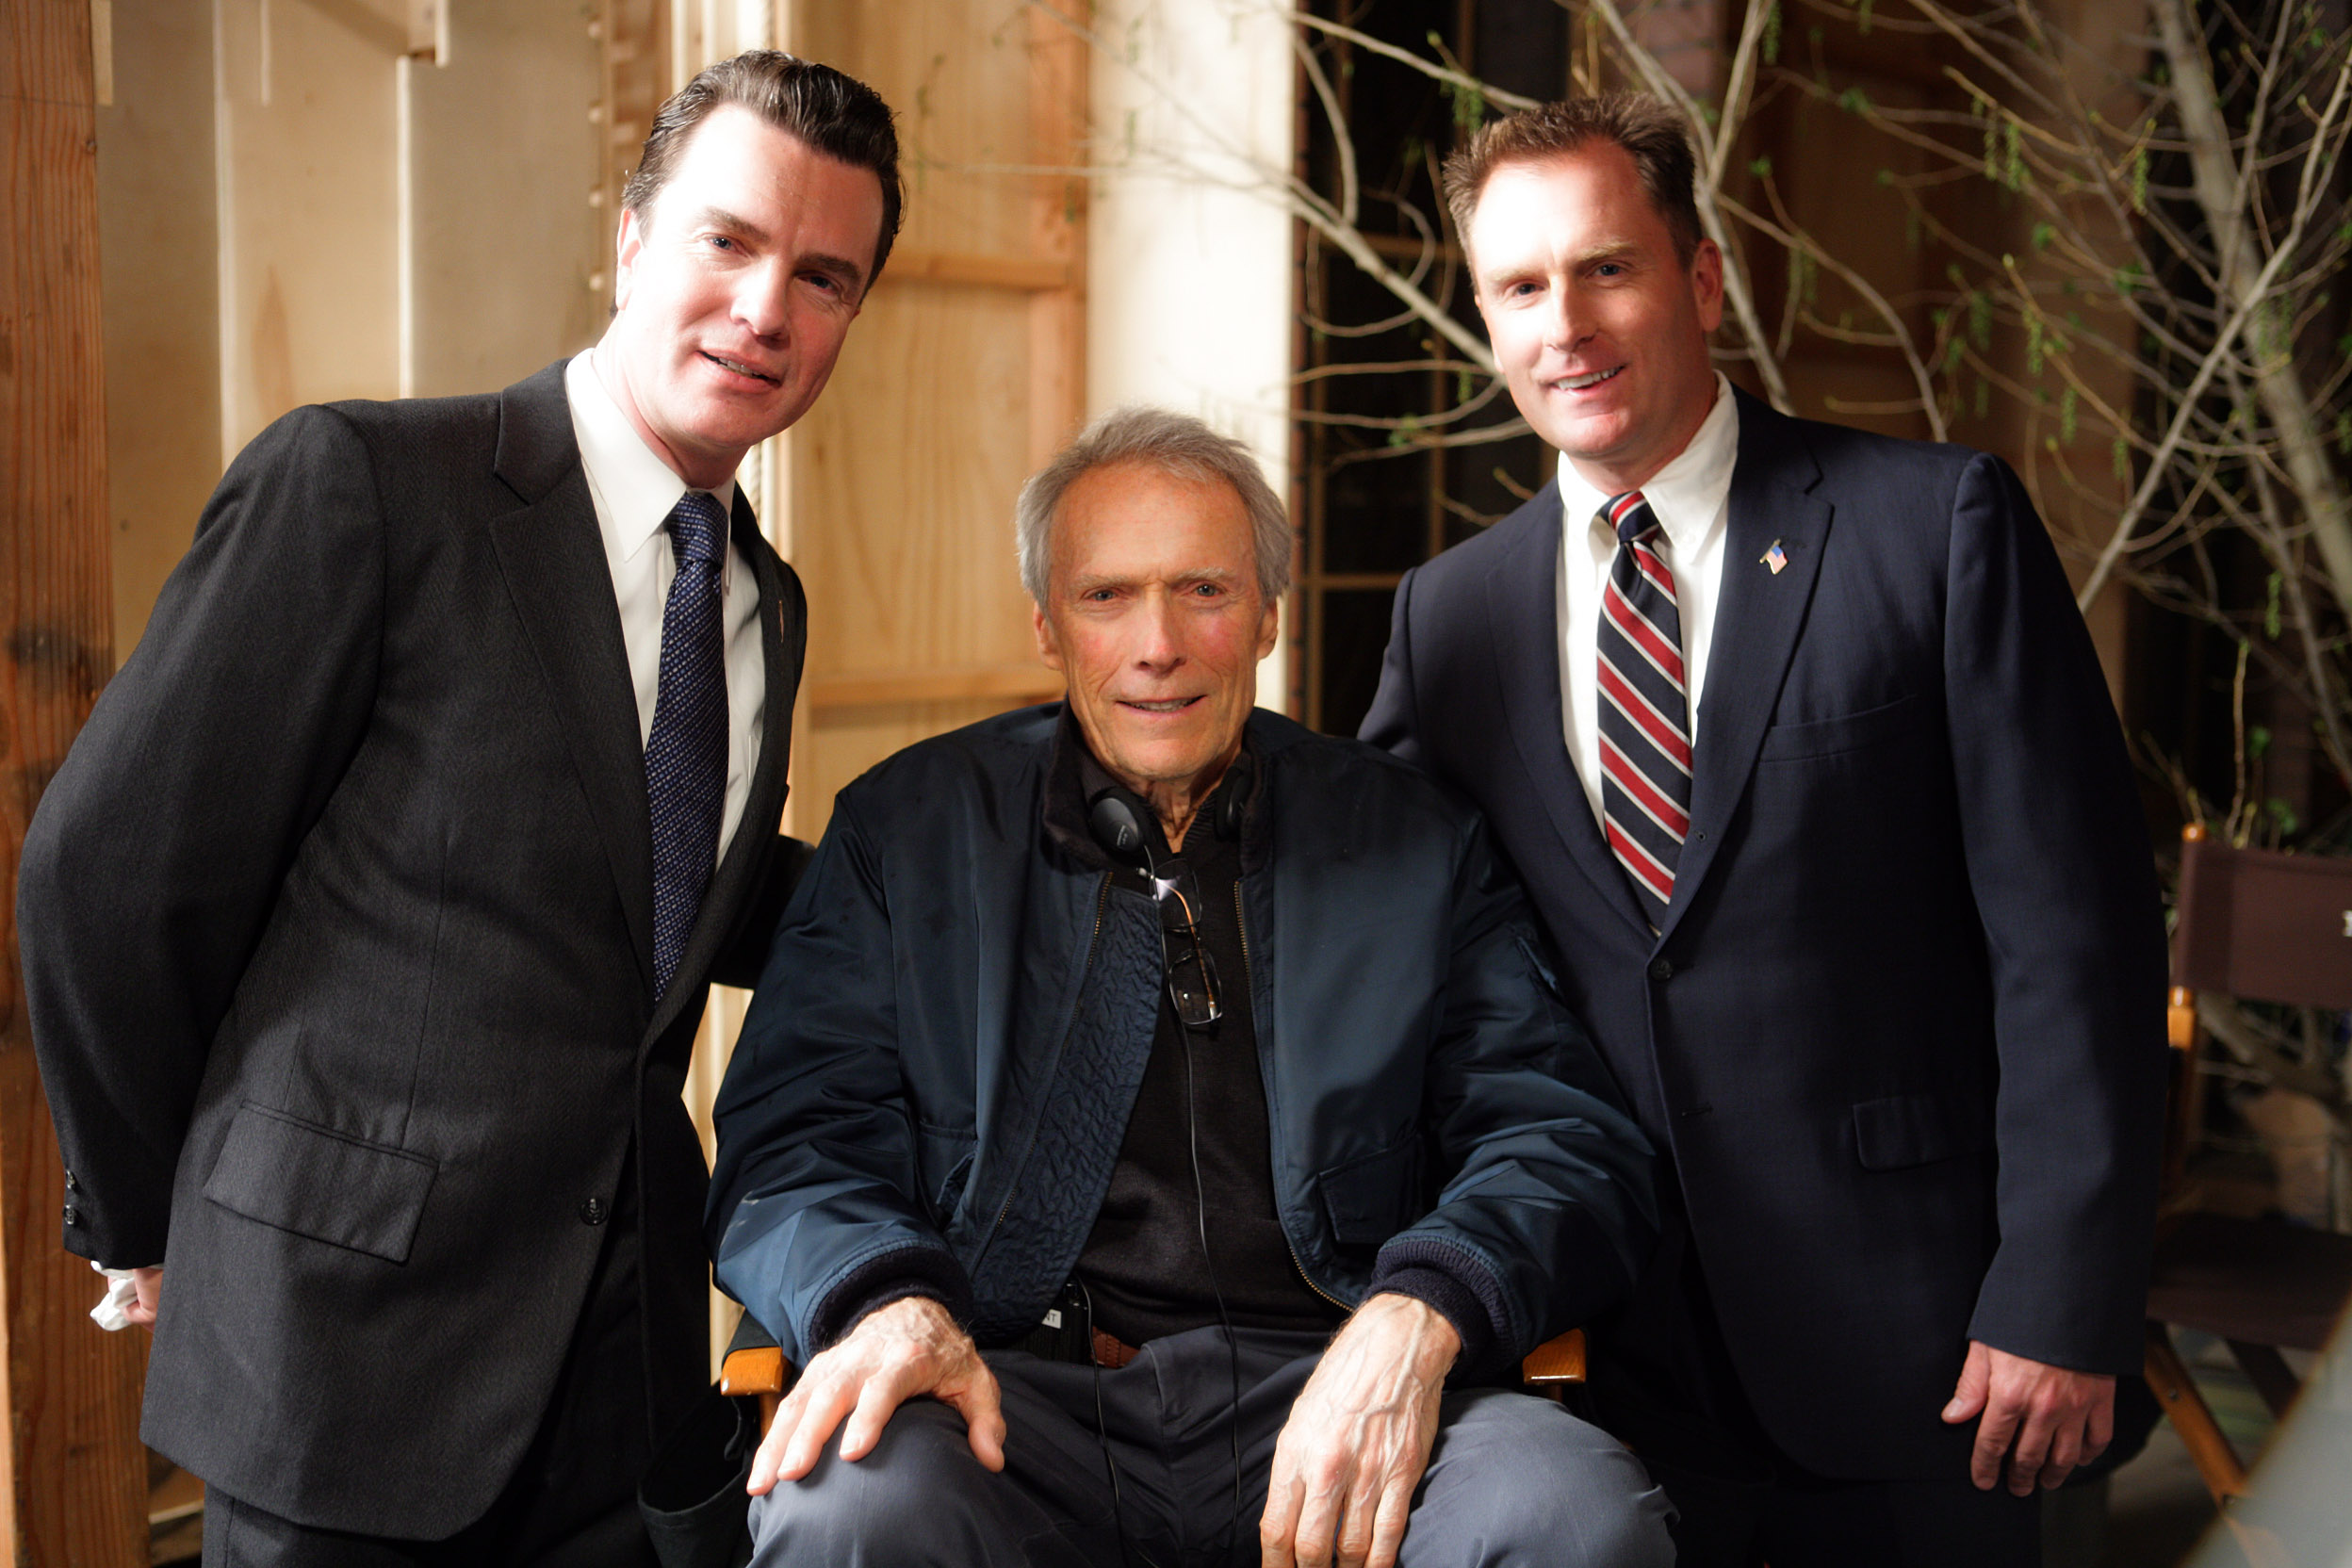 On the set of J. EDGAR with MR. EASTWOOD